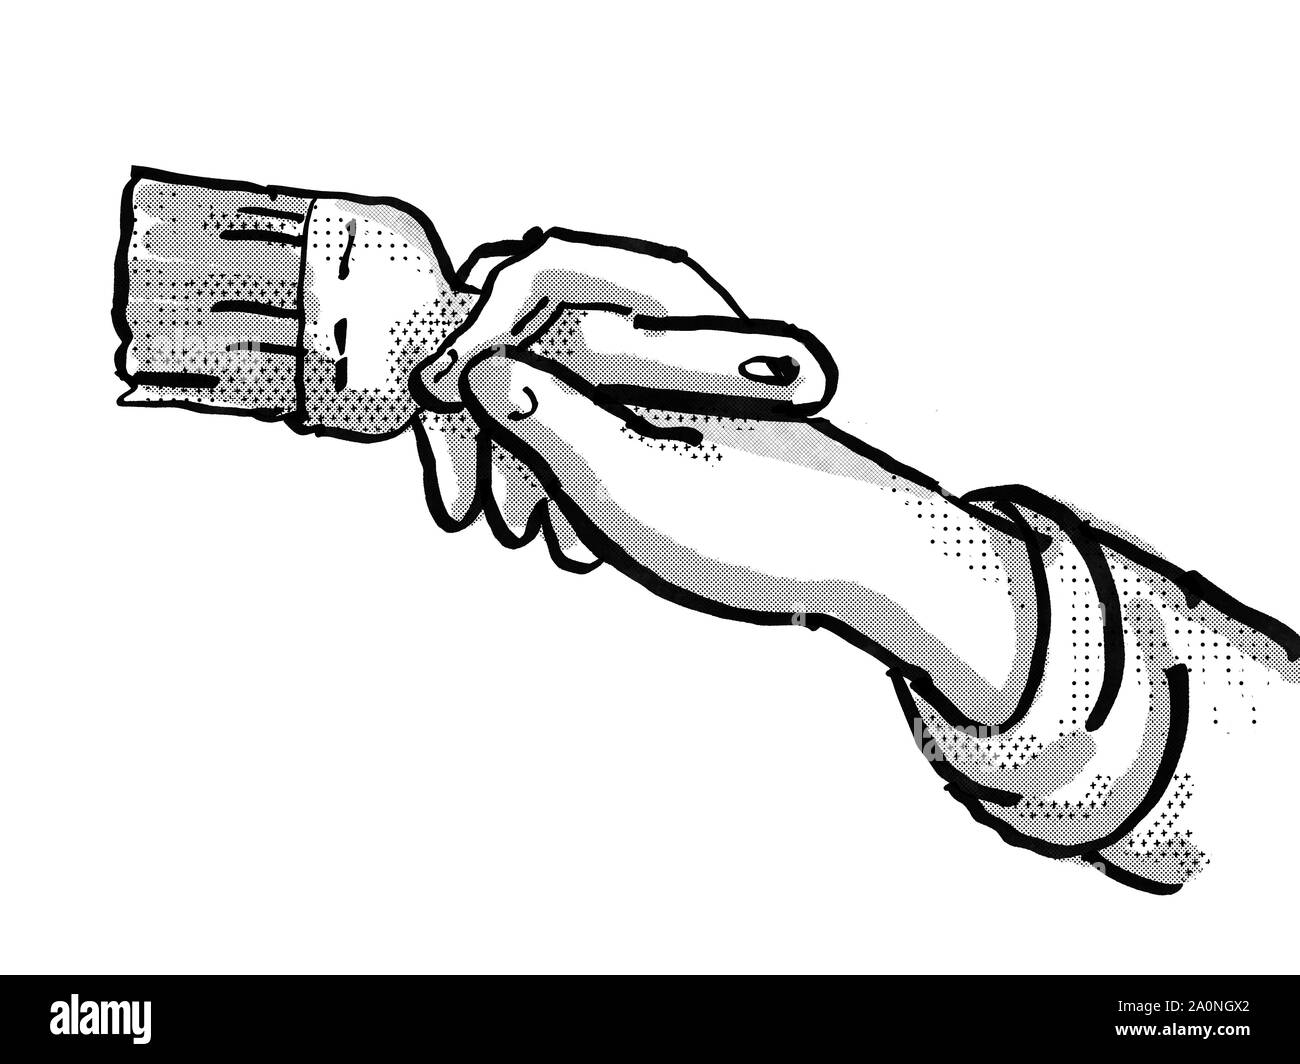 Retro cartoon style drawing of a domestic house painter hand painting with paintbrush on isolated white background done in black and white Stock Photo